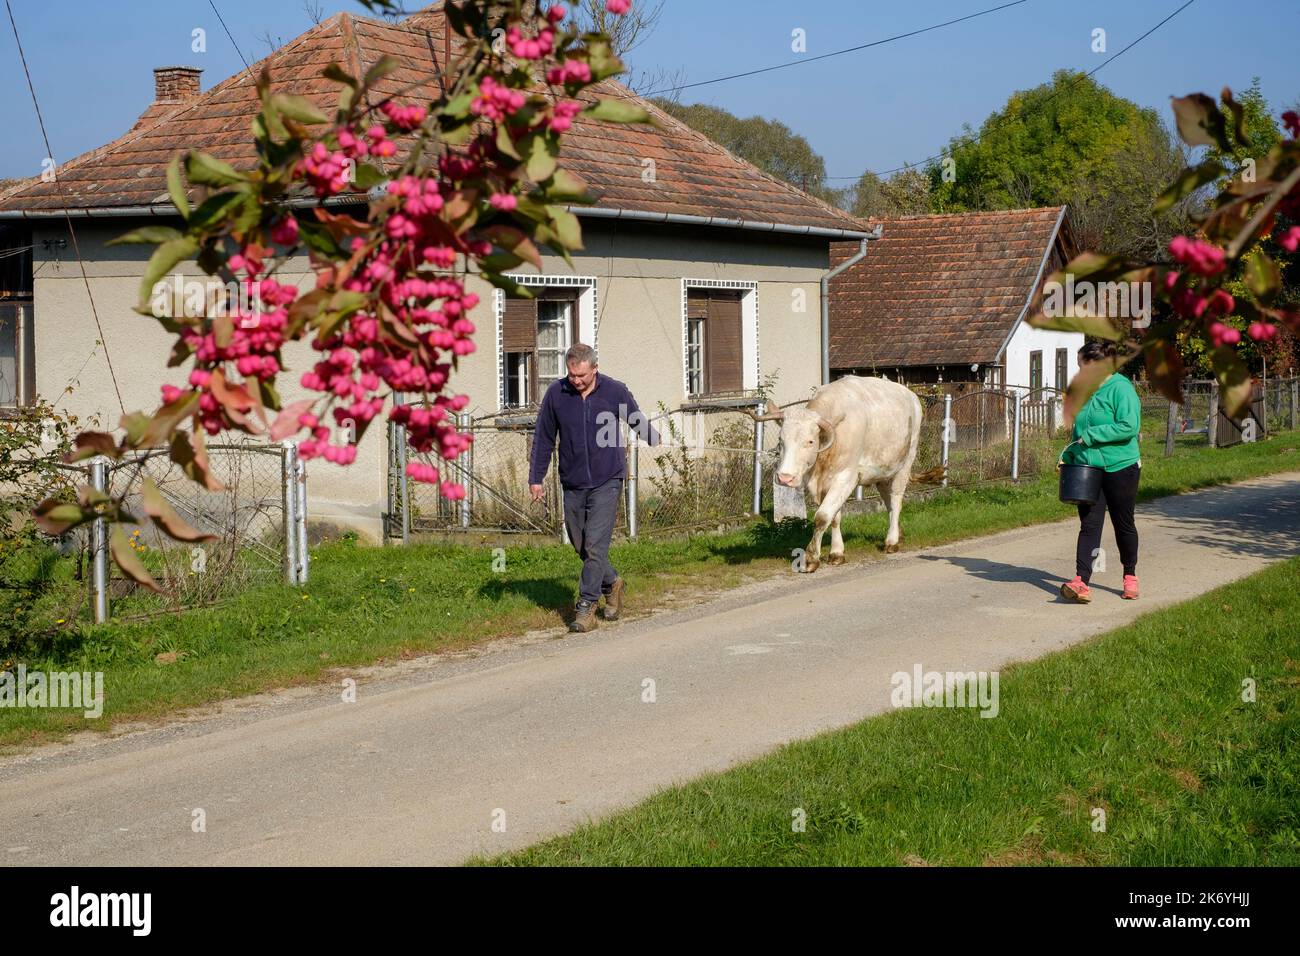 local couple walking their dairy cow to pasture through small rural hamlet lane zala county hungary Stock Photo